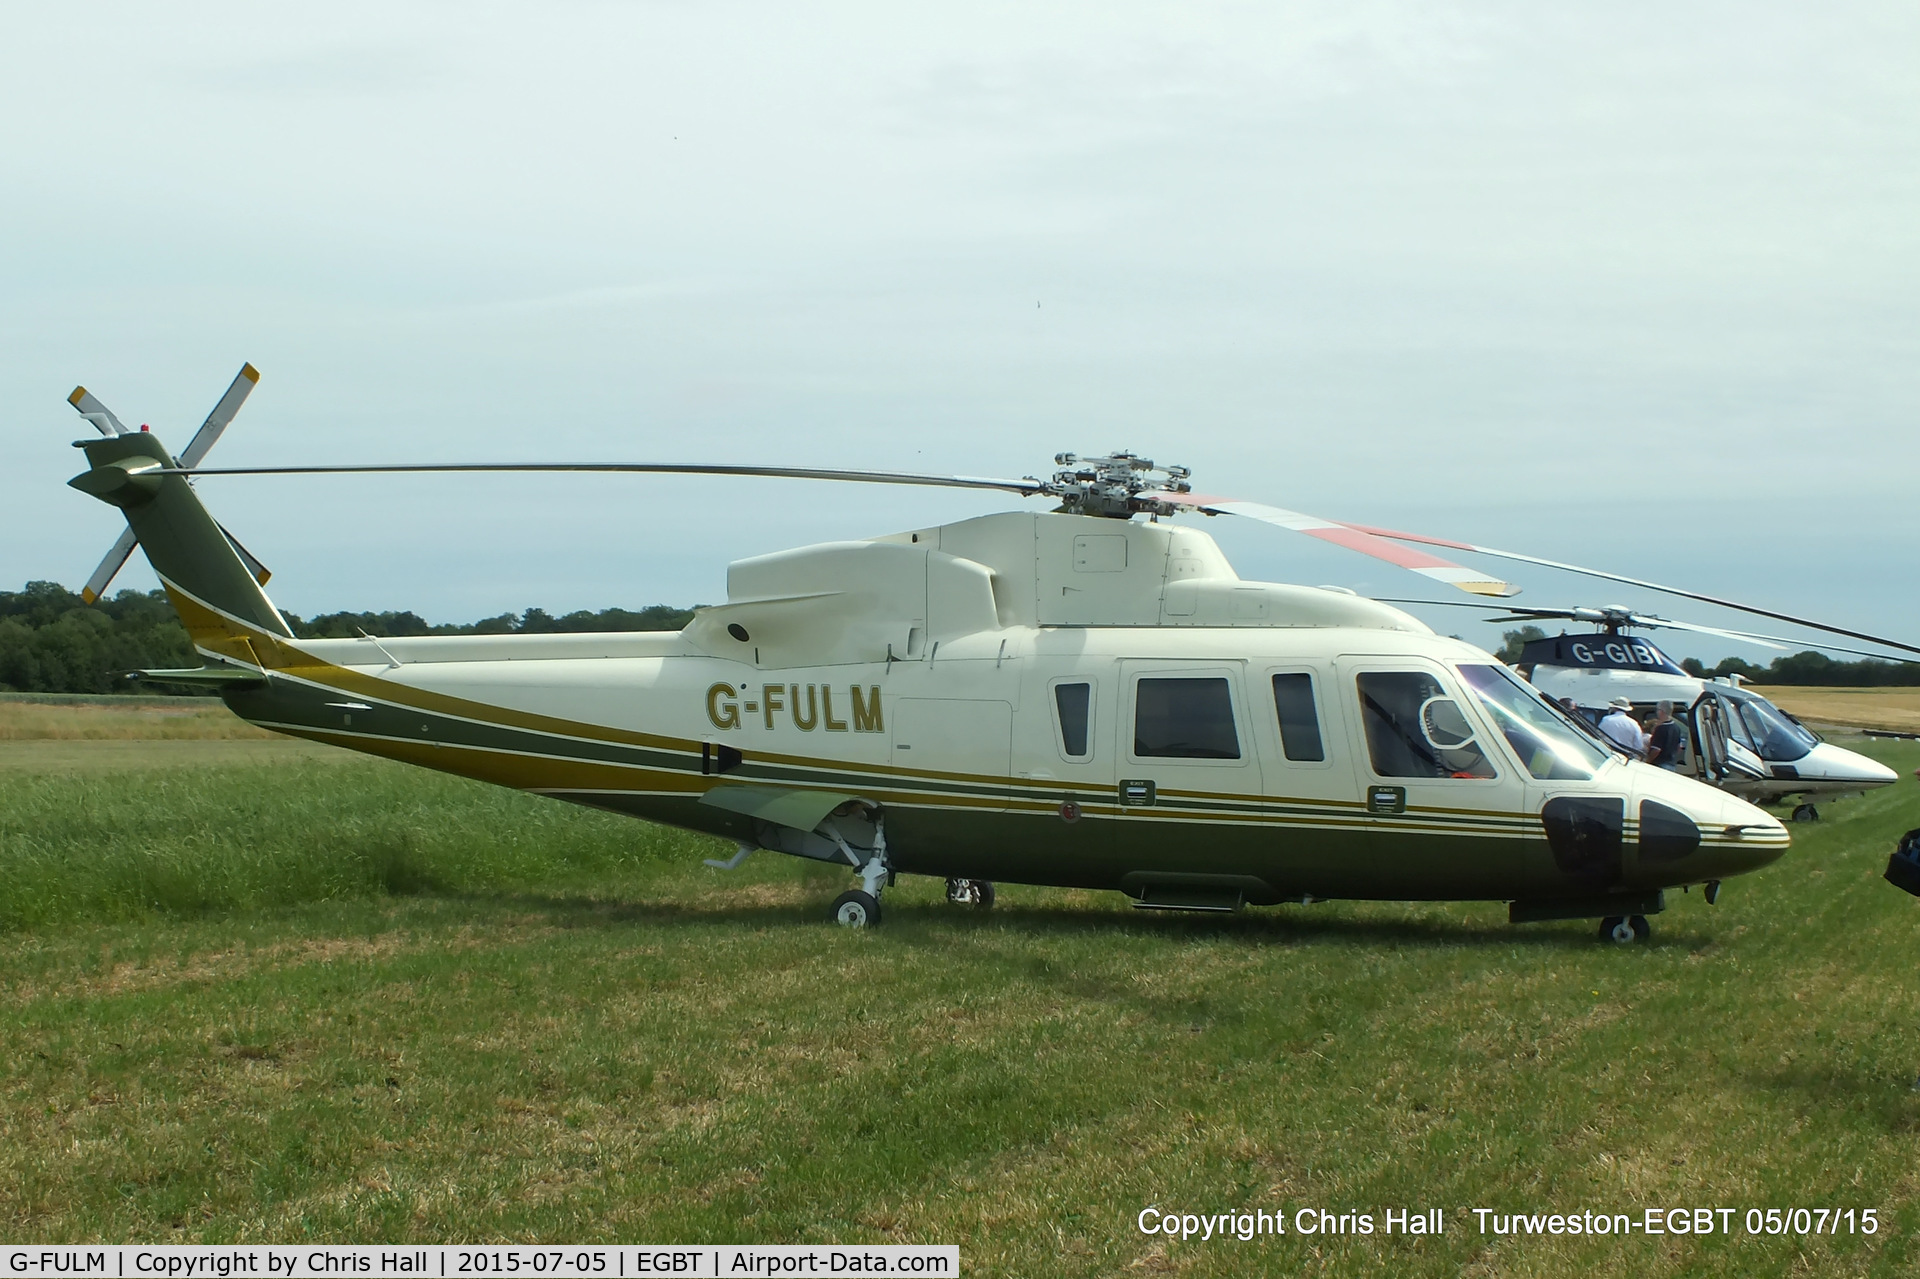 G-FULM, 2005 Sikorsky S-76C C/N 760583, ferrying race fans to the British F1 Grand Prix at Silverstone